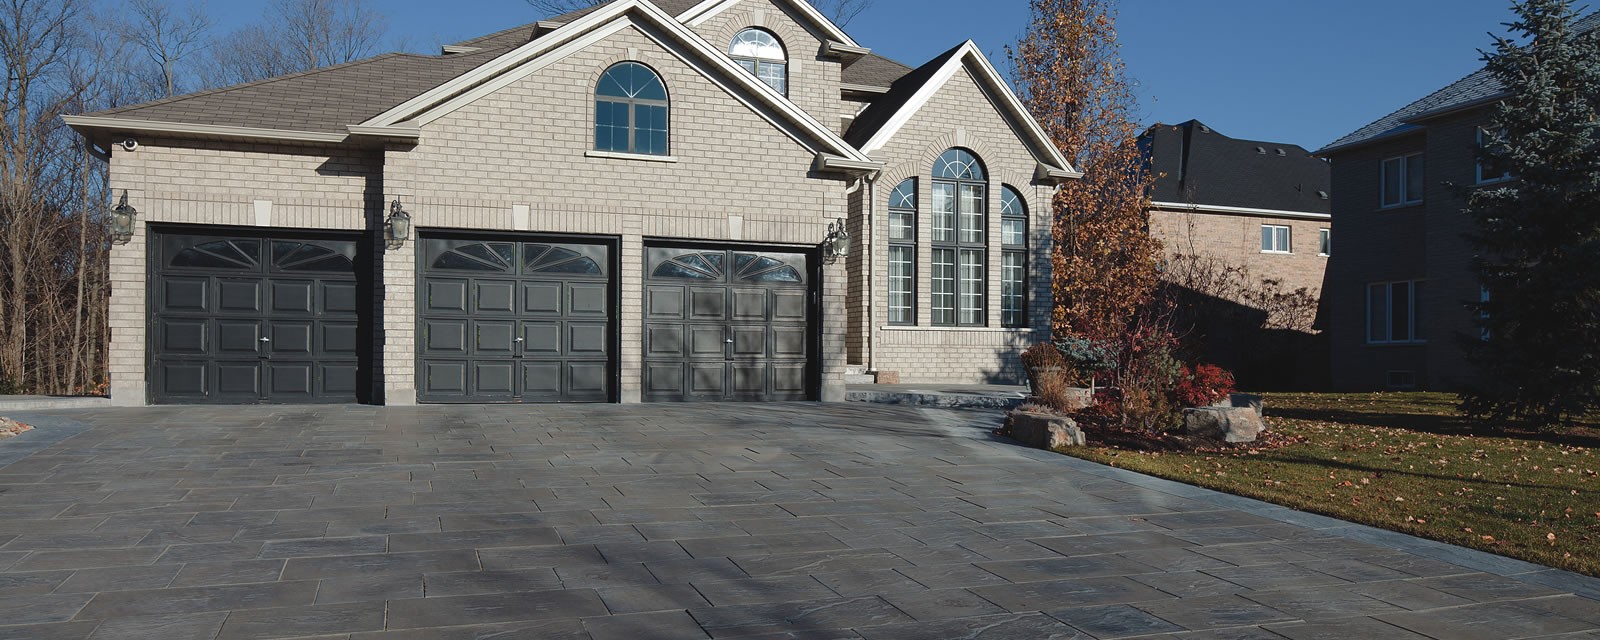 Credit Valley-Sandstone® Structural Flagstone™